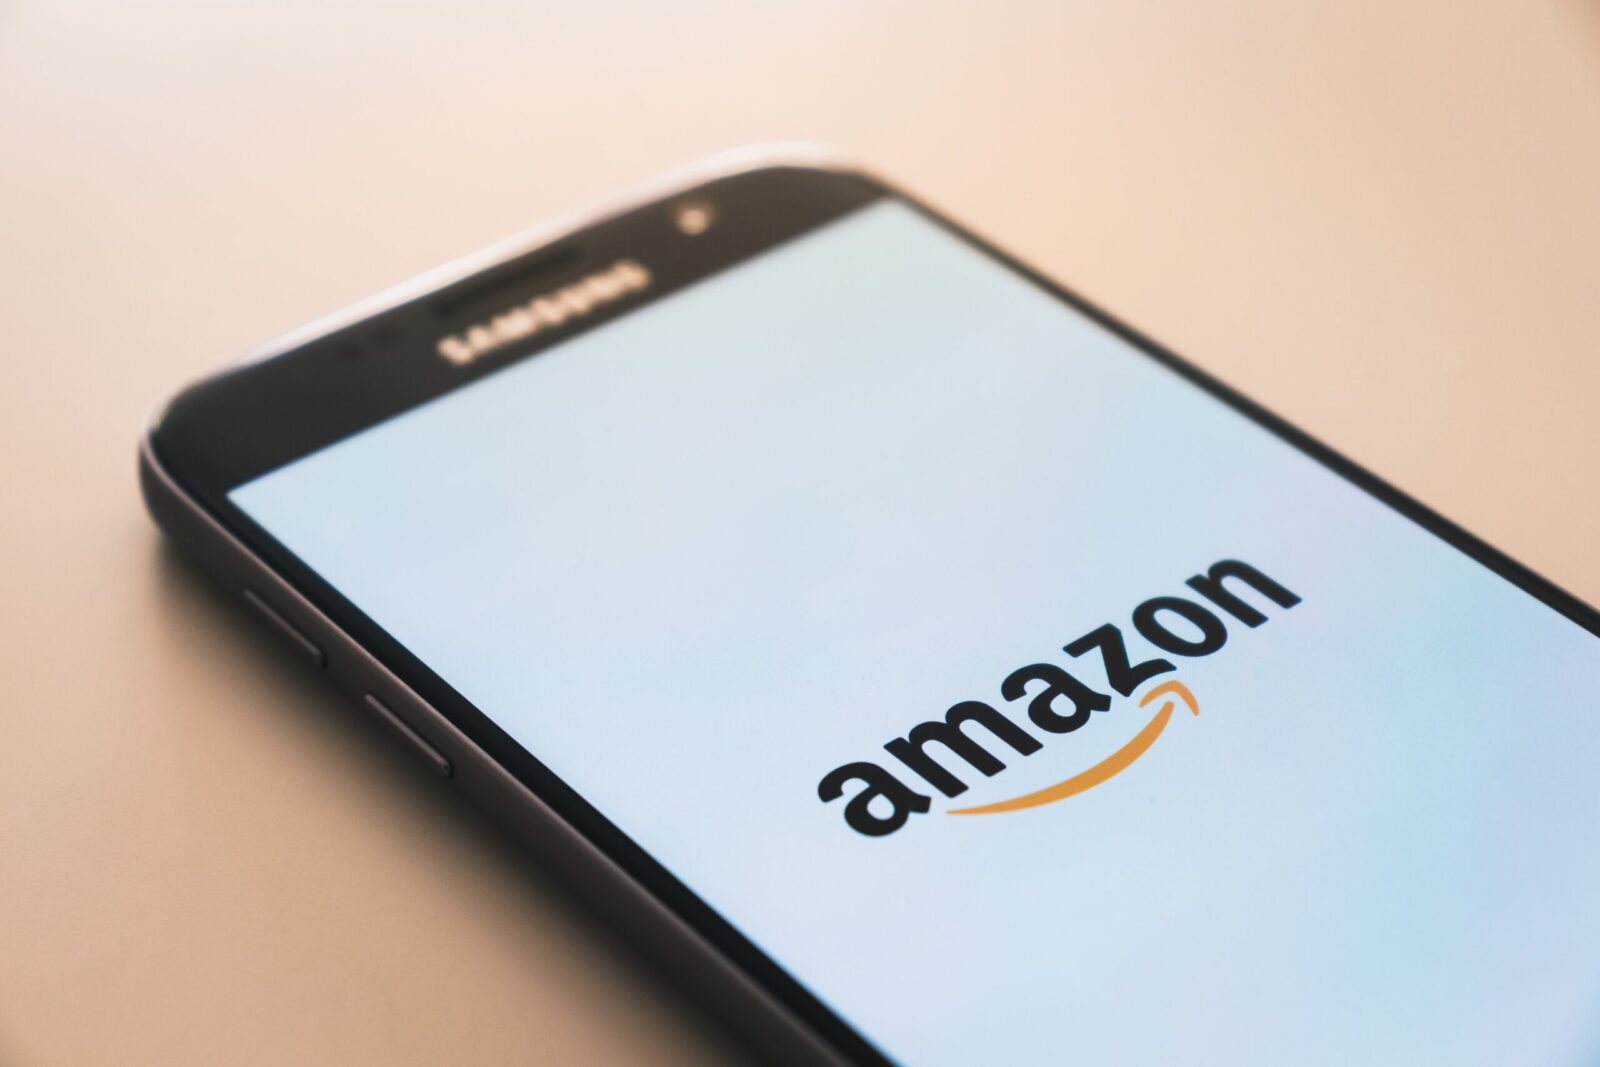 What is the most expensive thing on Amazon you can buy right now?